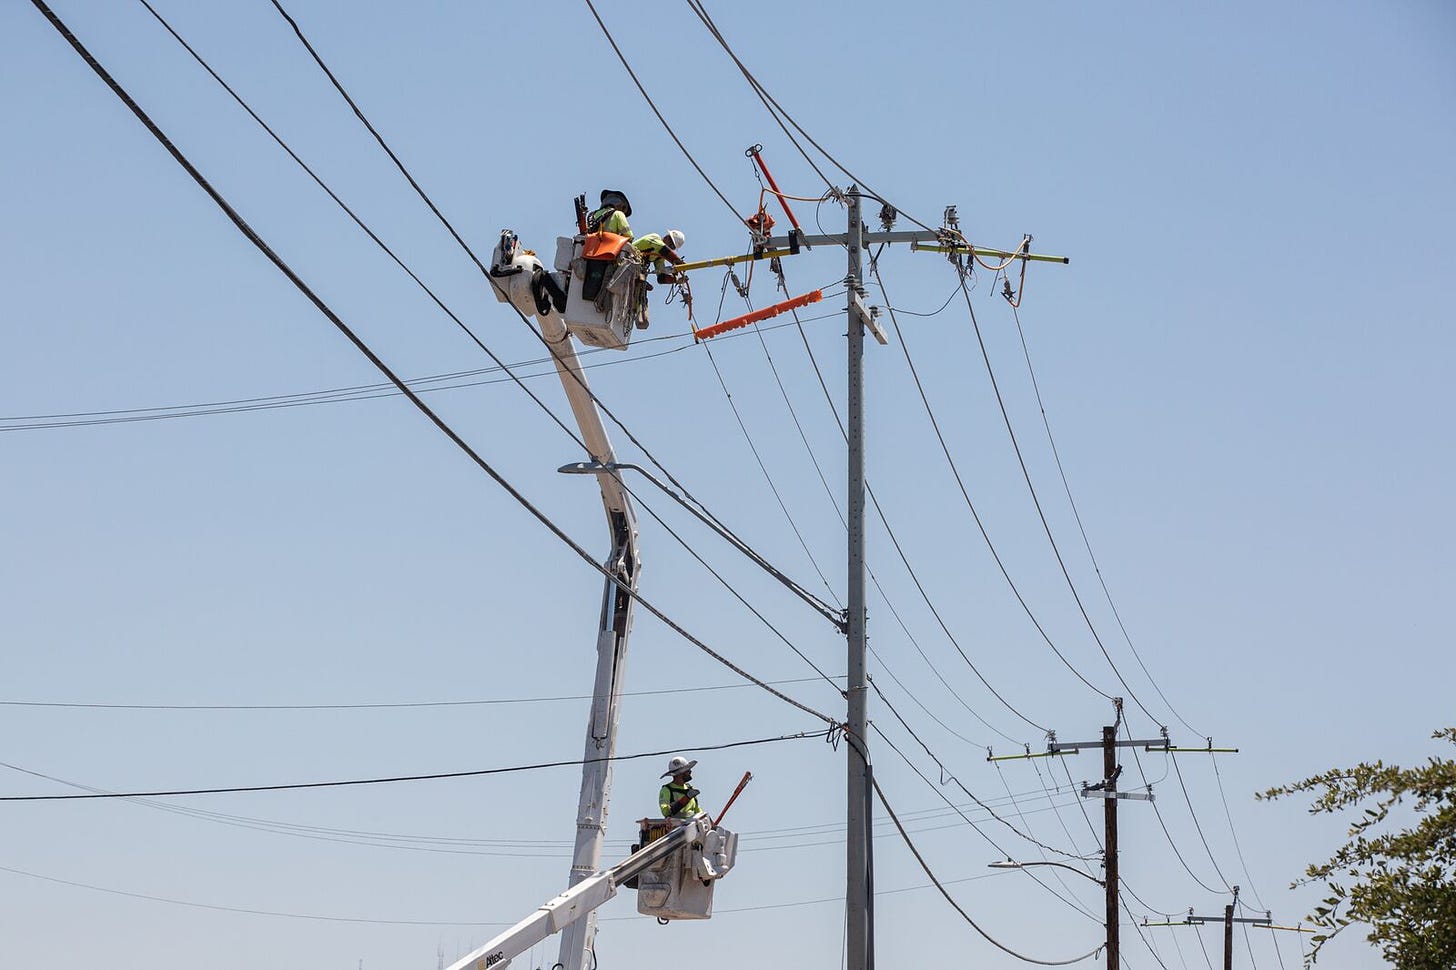 A picture of utility workers in a cherry-picker crane to perform maintenance on power lines. The sky is clear and blue